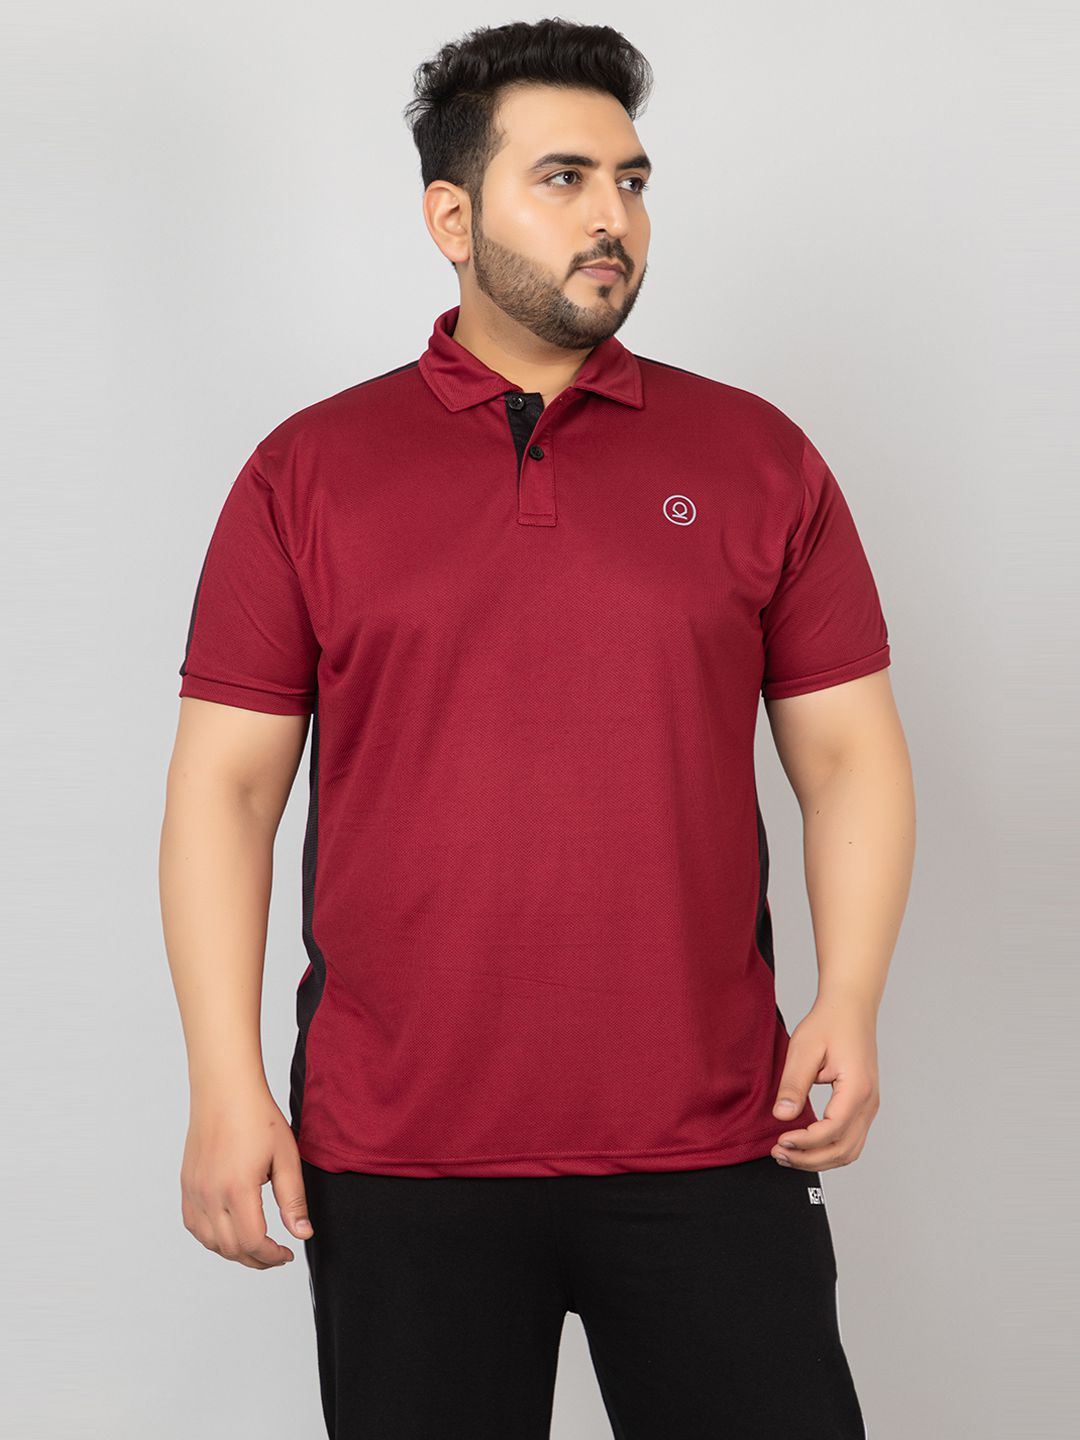     			Chkokko Polyester Regular Fit Solid Half Sleeves Men's Polo T Shirt - Maroon ( Pack of 1 )